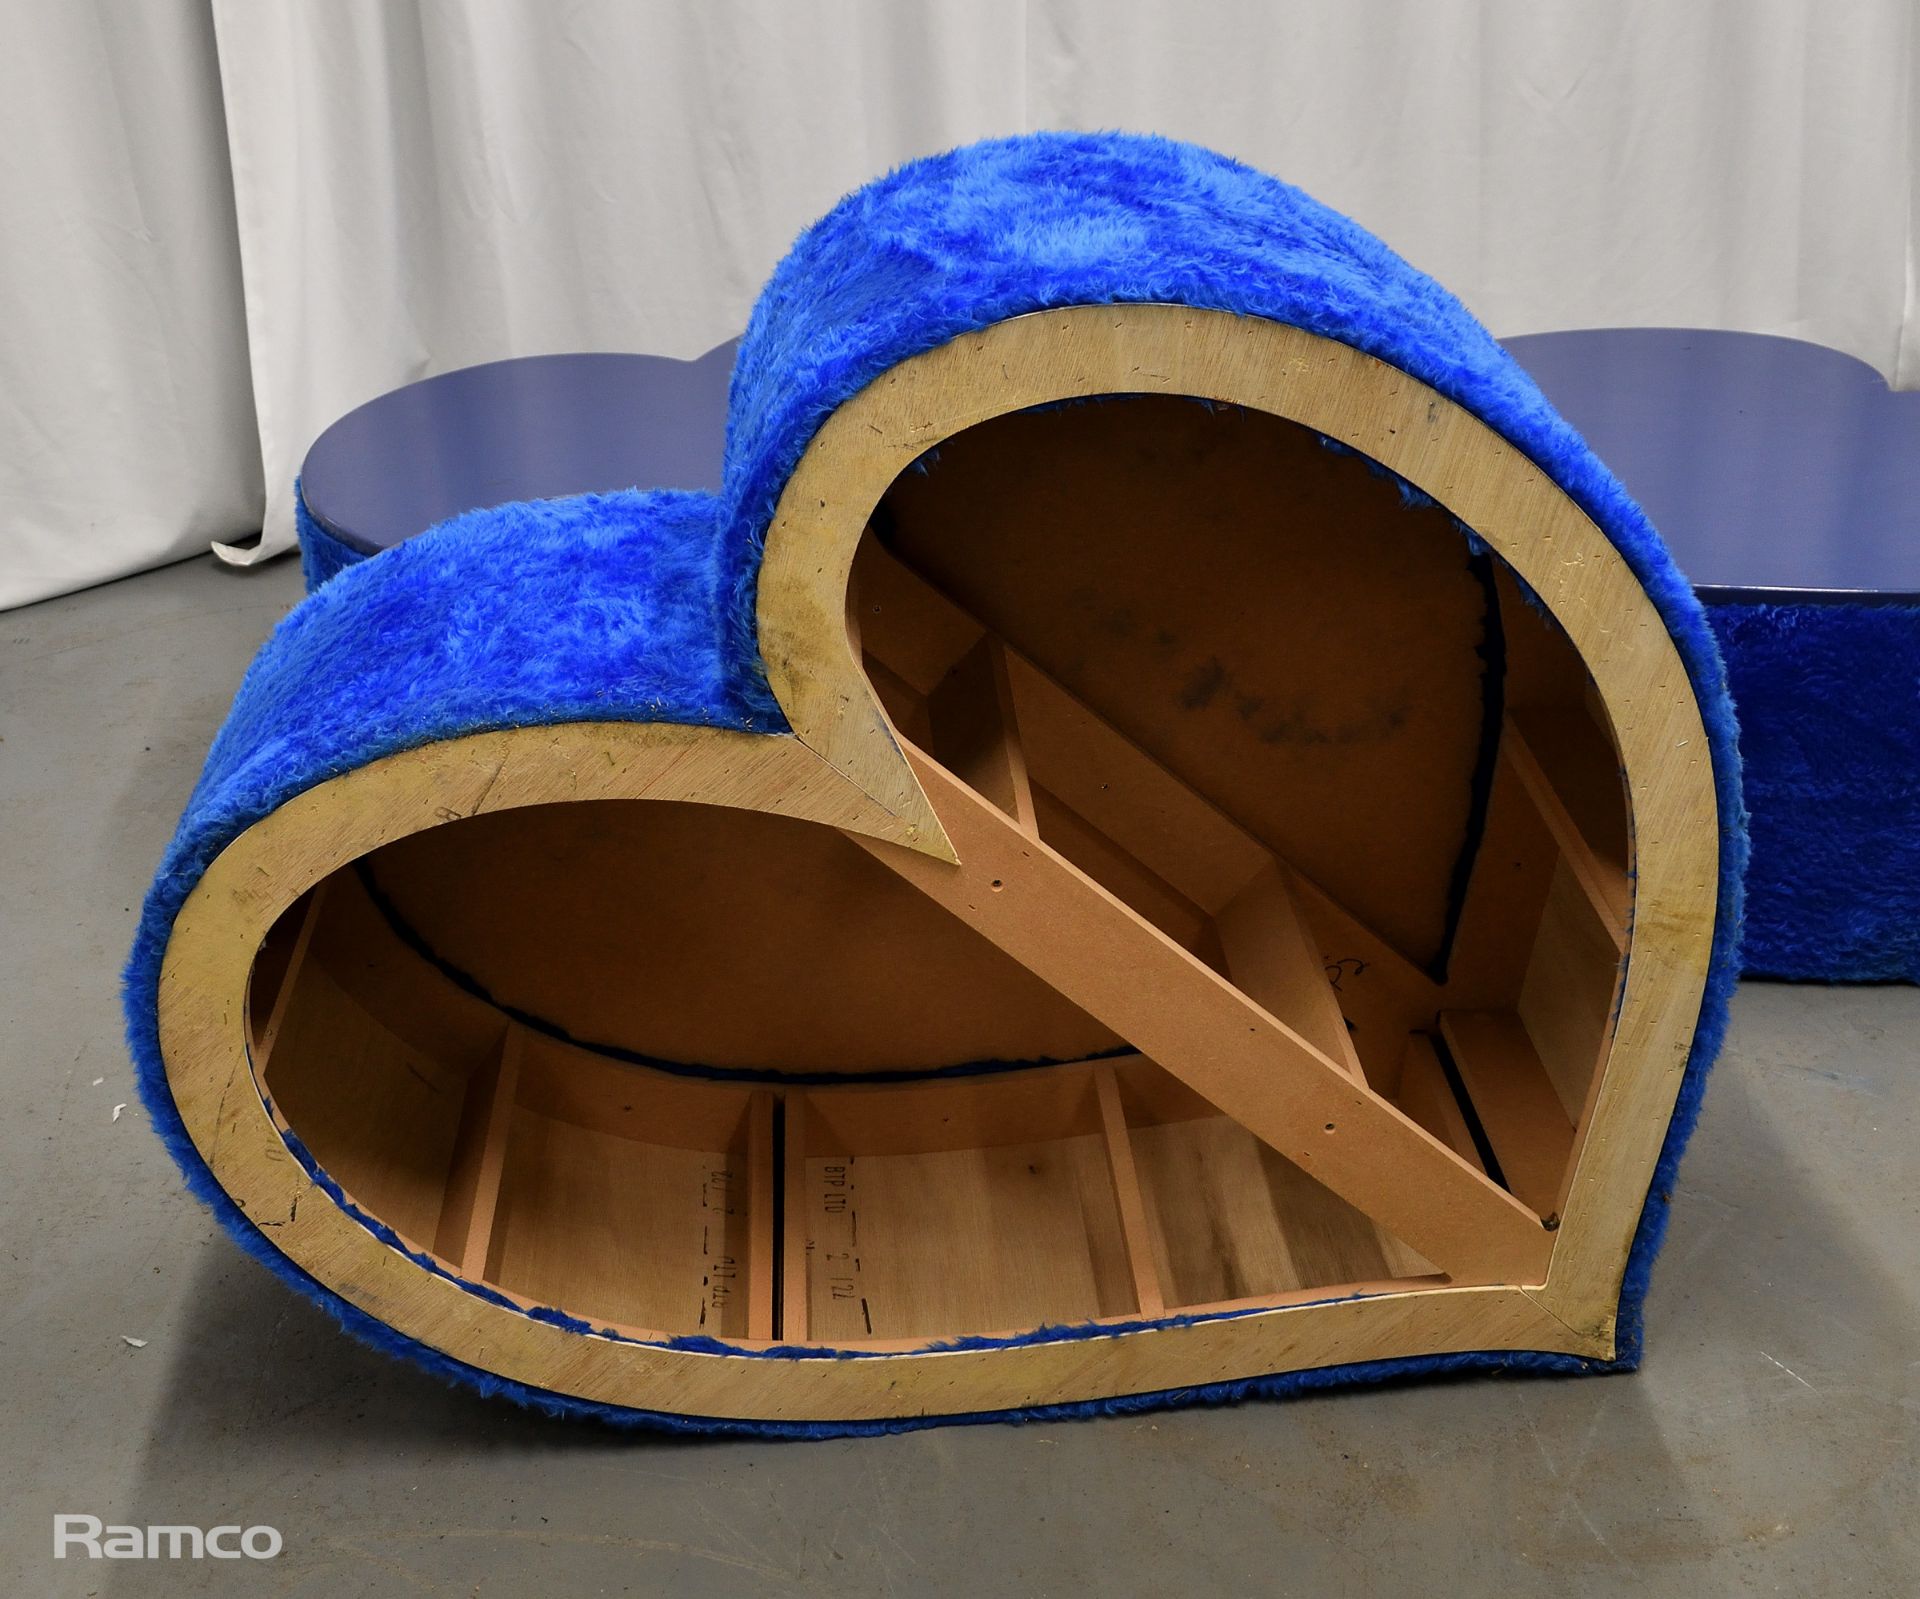 3x Asymmetrical heart shaped blue fur-covered wooden tables from countries' seating area - Image 13 of 13